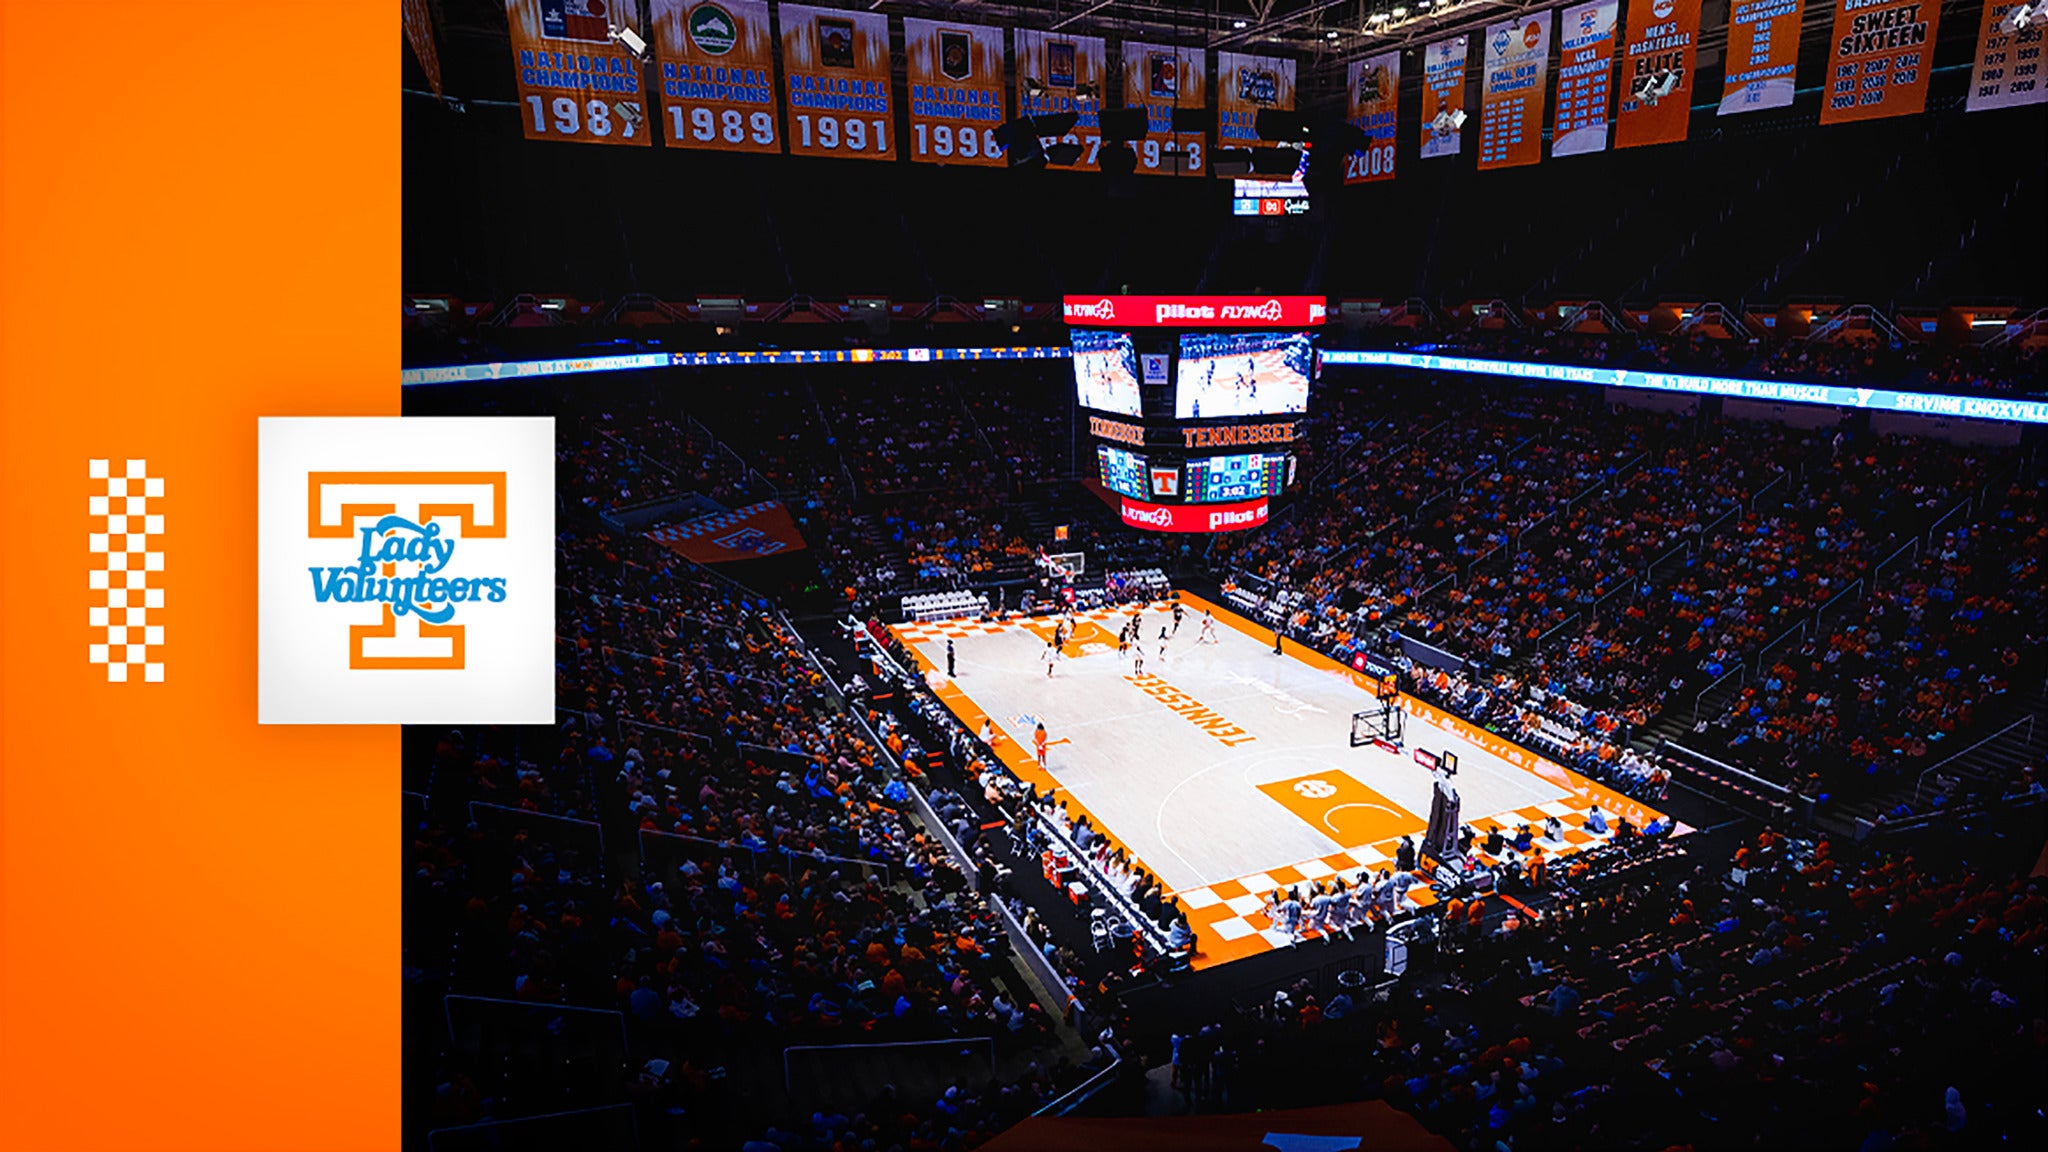 Tennessee Lady Volunteers Women's Basketball vs. Mississippi State University Bulldogs Womens Basketball in Knoxville promo photo for Season presale offer code